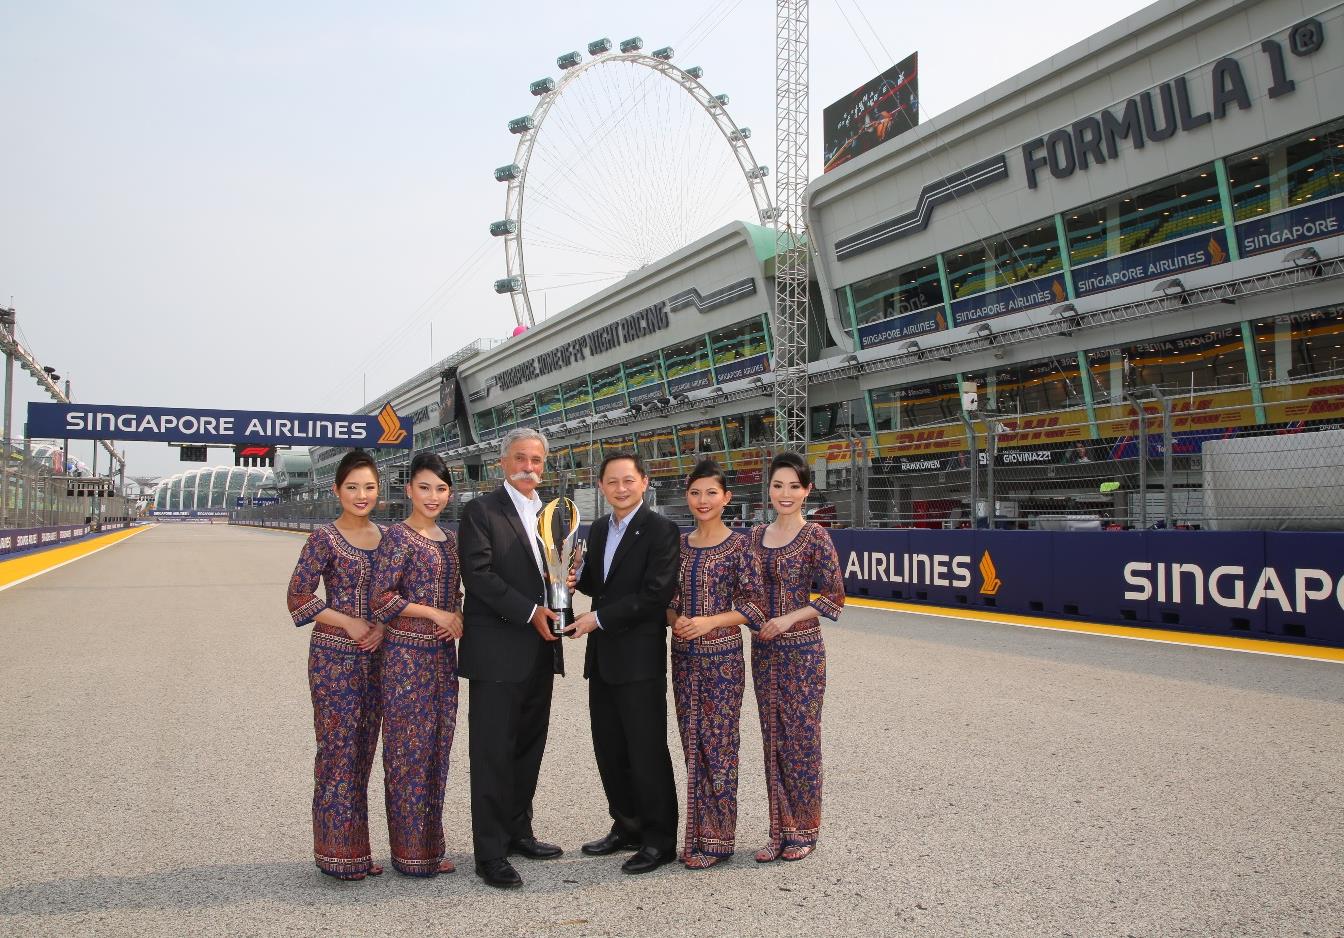 Singapore Airlines, the current title sponsor of the Formula 1 Grand Prix in Singapore since 2014 has extended its sponsorship for another two years till 2021.